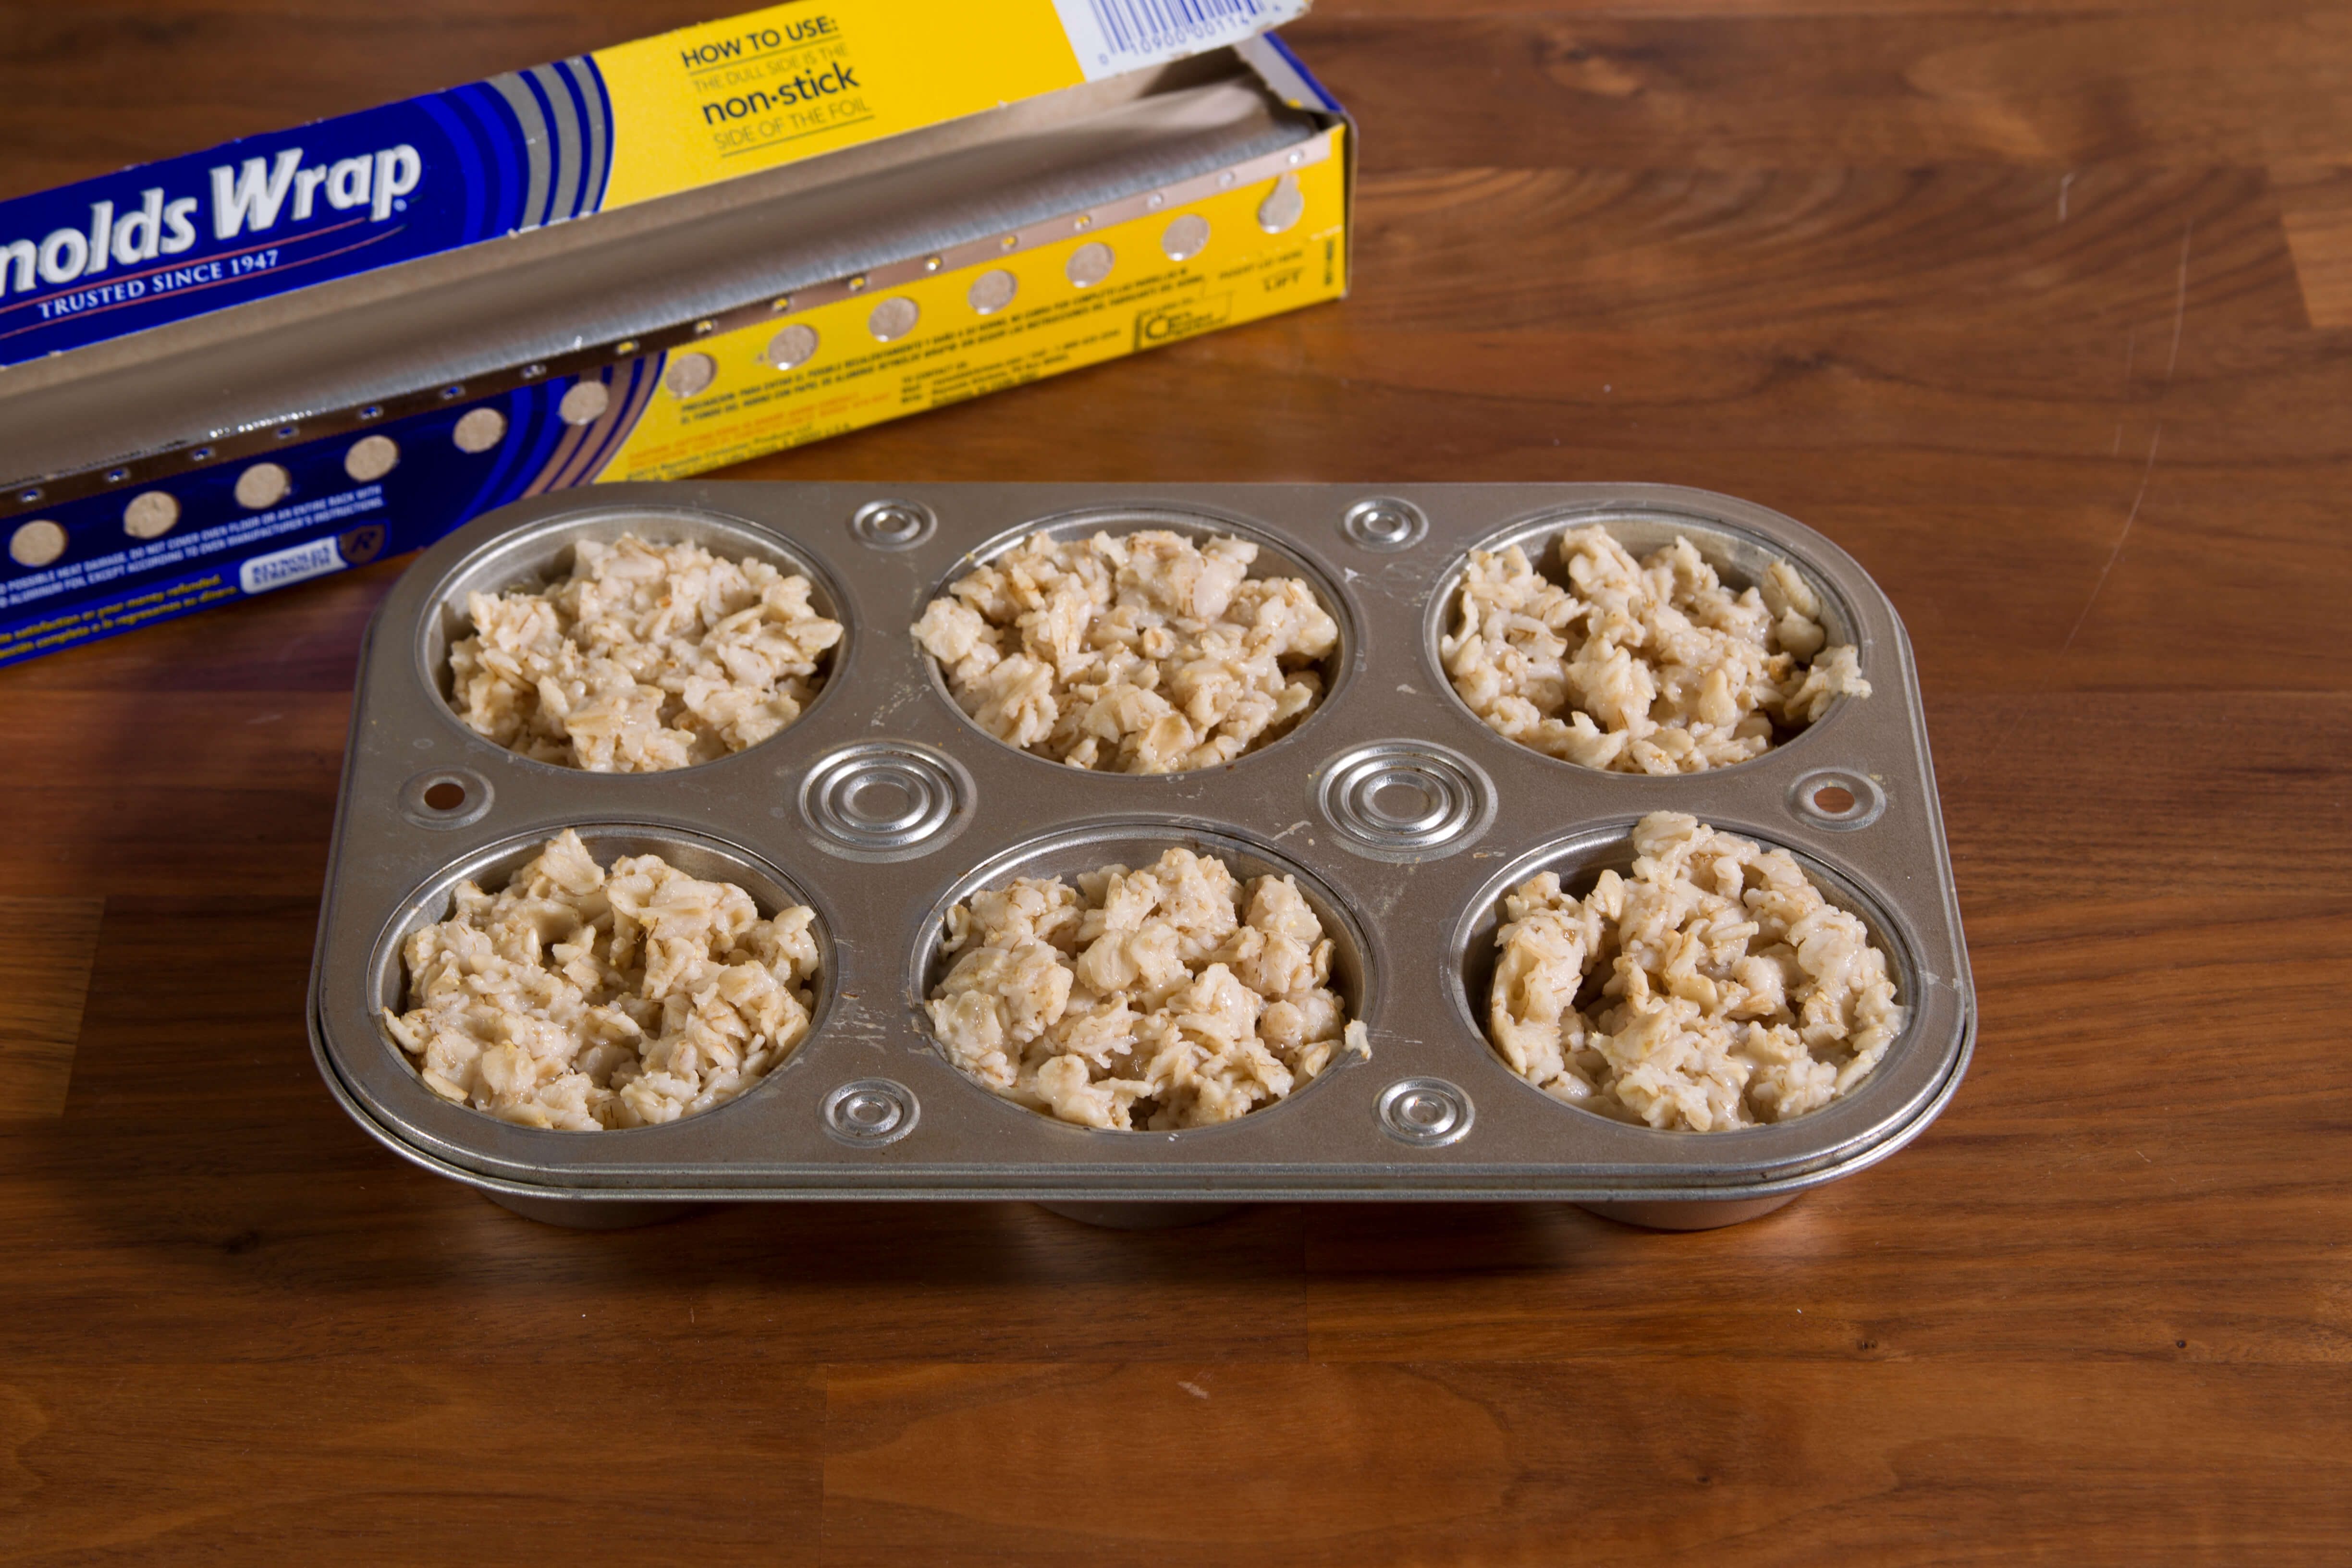 Creative Uses for Muffin Tins